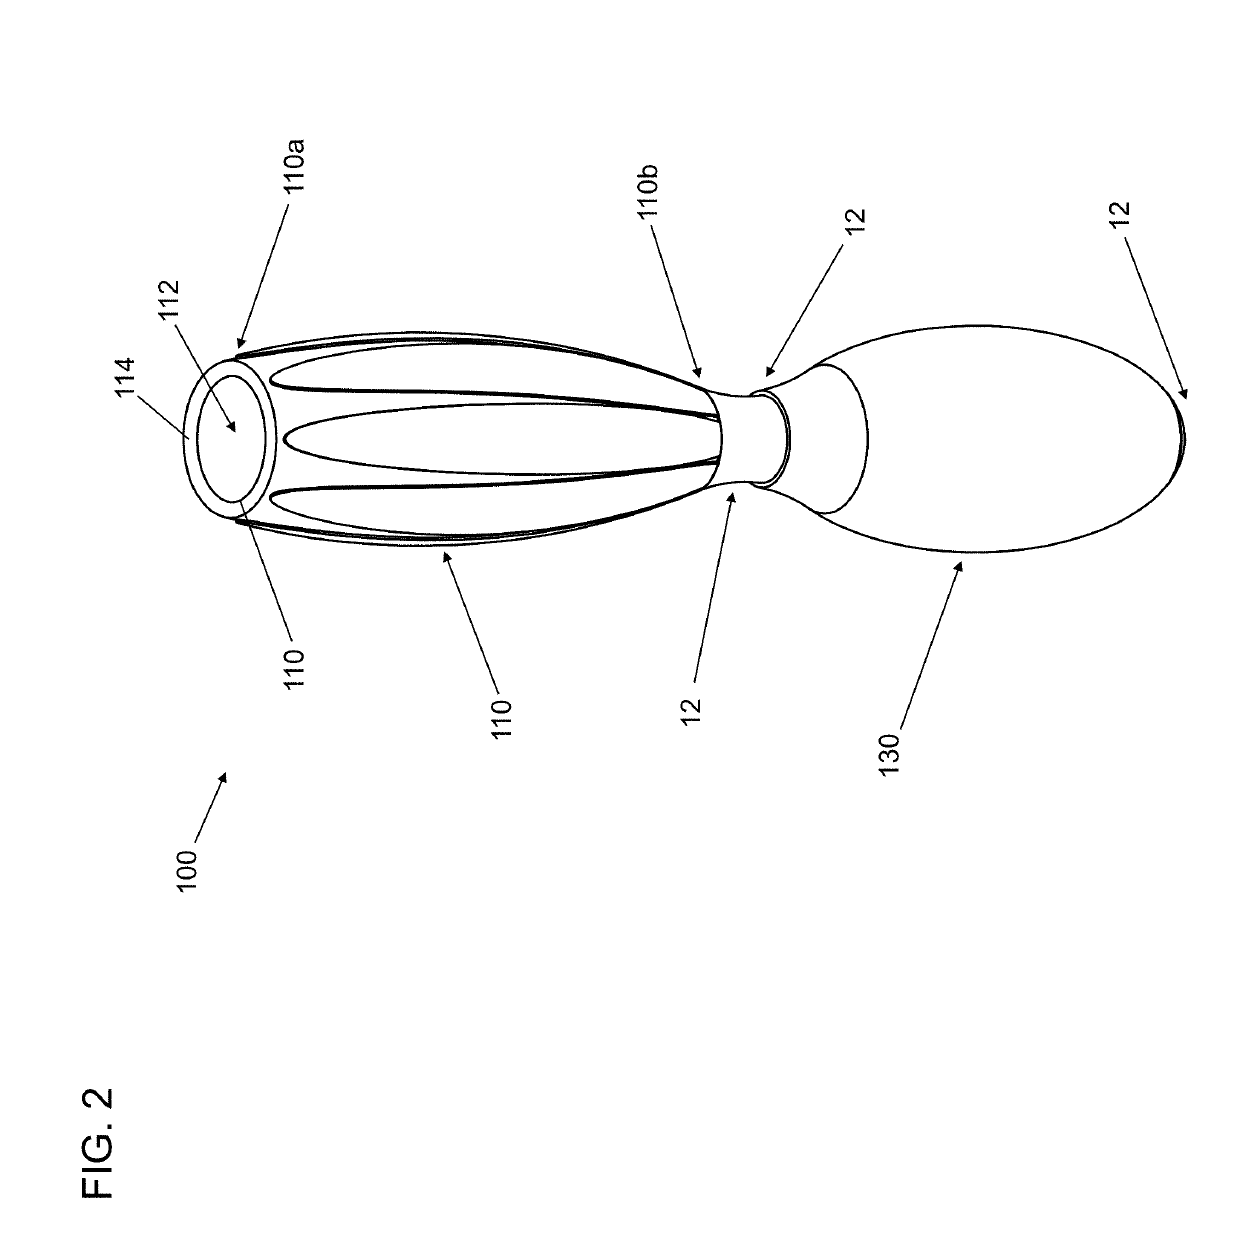 Menstrual fluid collection device and method thereof